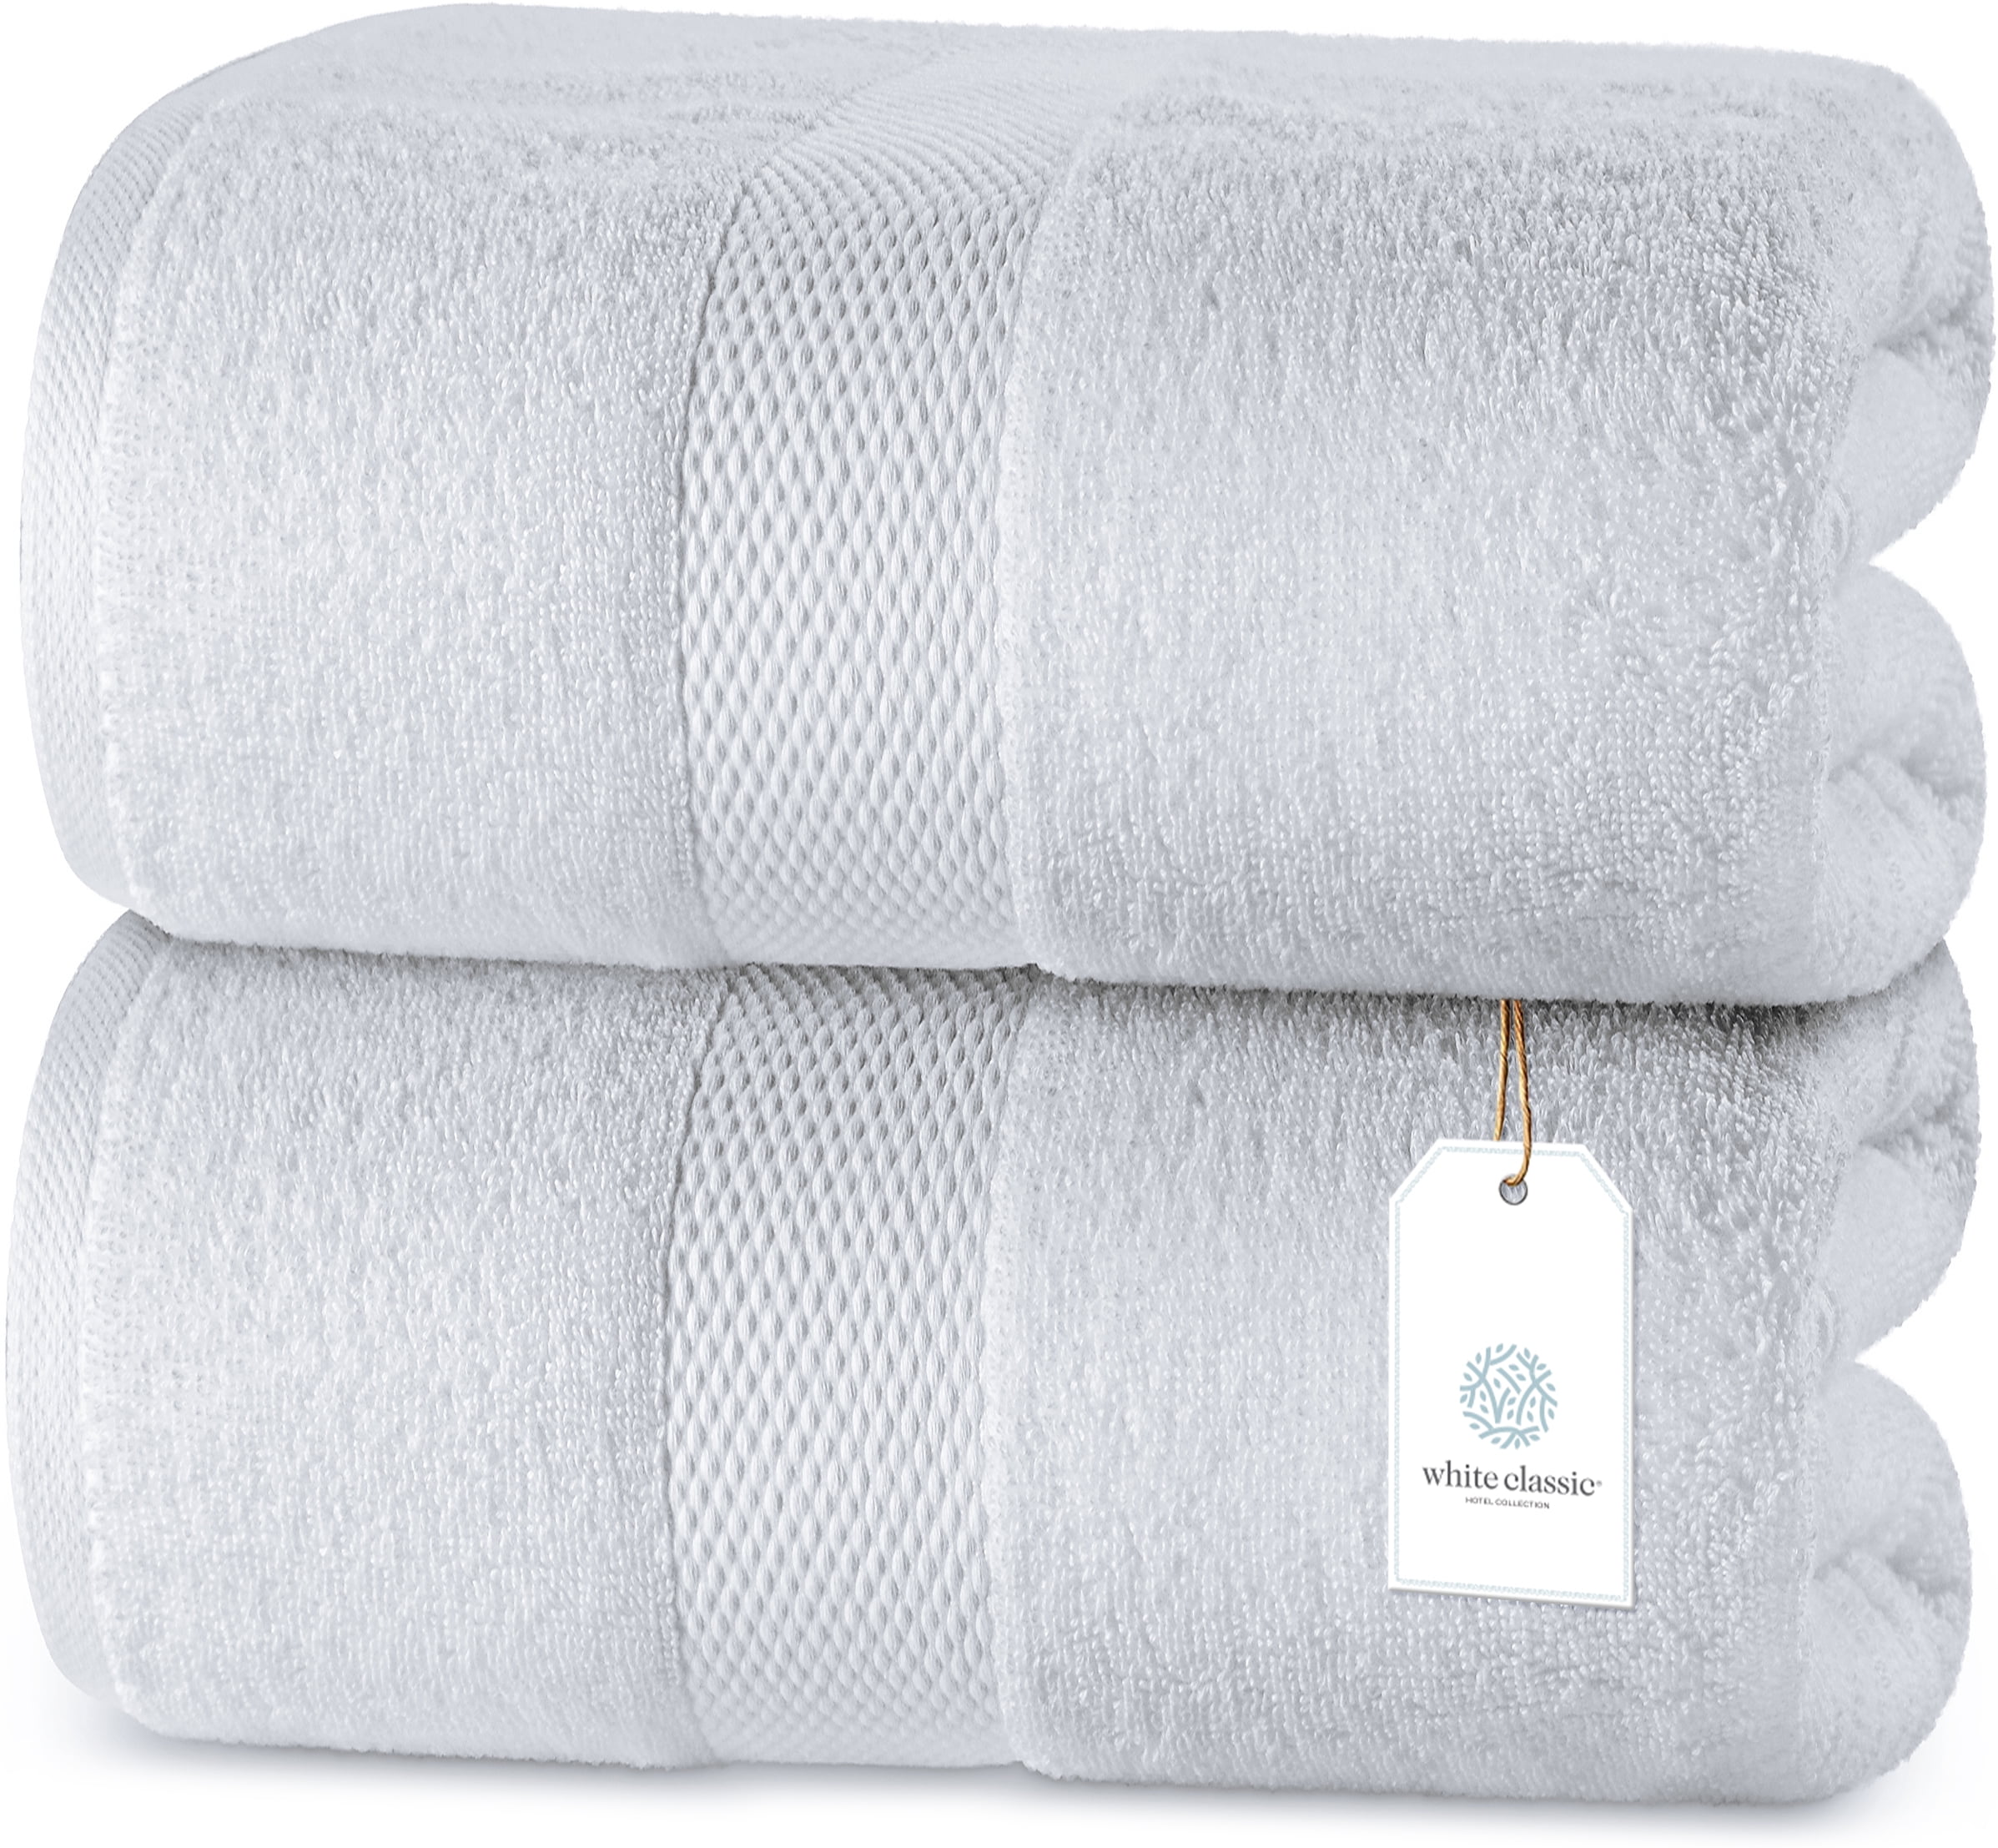 Hotel Collection Towel 35x70 Luxury Bath Towels Large 2 Pack Pink 